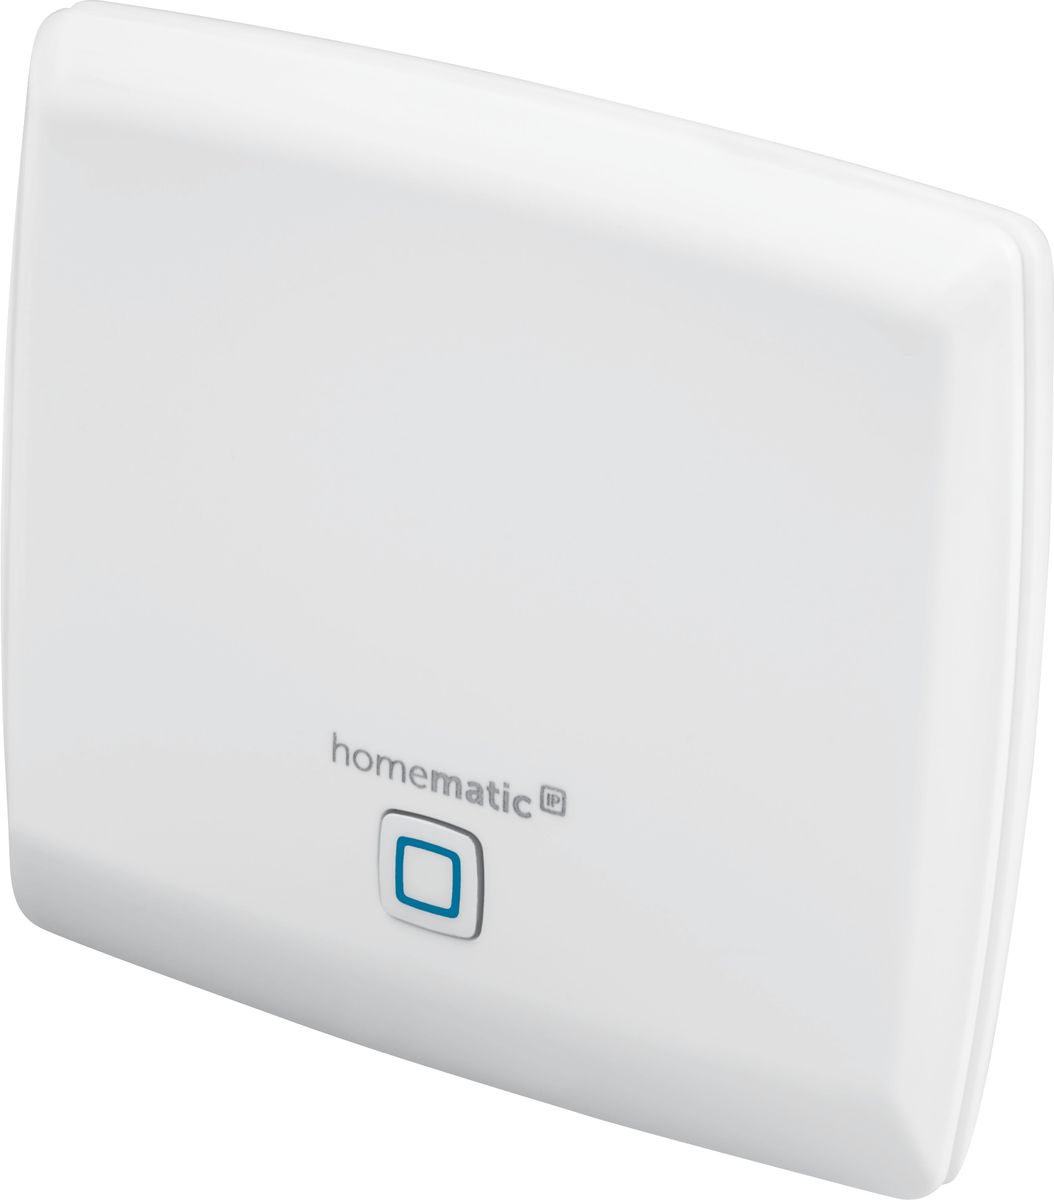 HOMEMATIC IP Smart Home 140887 Access Point von Homematic IP